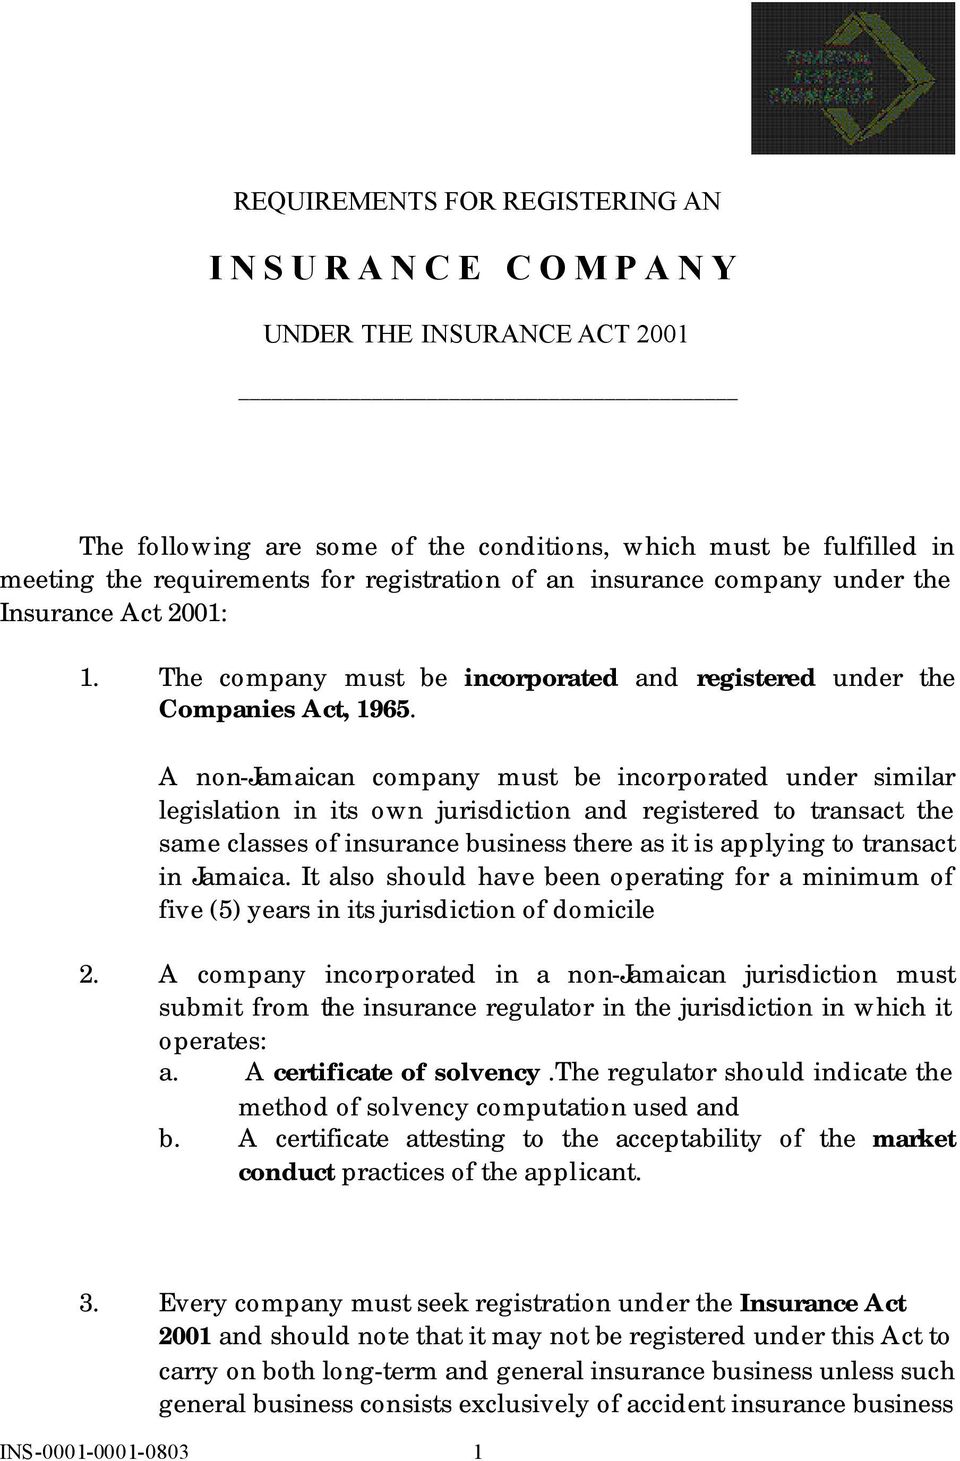 A non-jamaican company must be incorporated under similar legislation in its own jurisdiction and registered to transact the same classes of insurance business there as it is applying to transact in